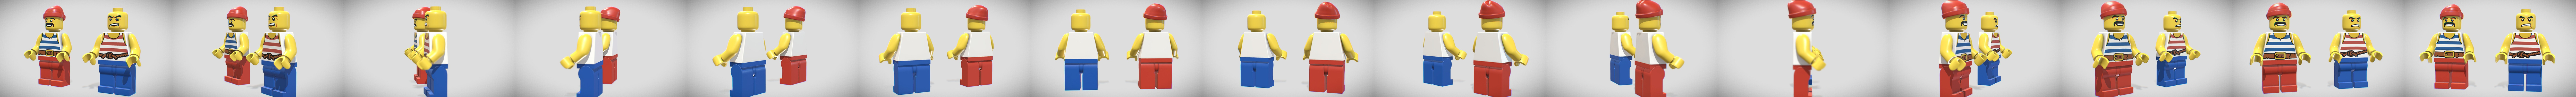 Lego Minifigures - Download Free 3D model by FaceTheEdge (@faceTheEdge)  [b6457d9]